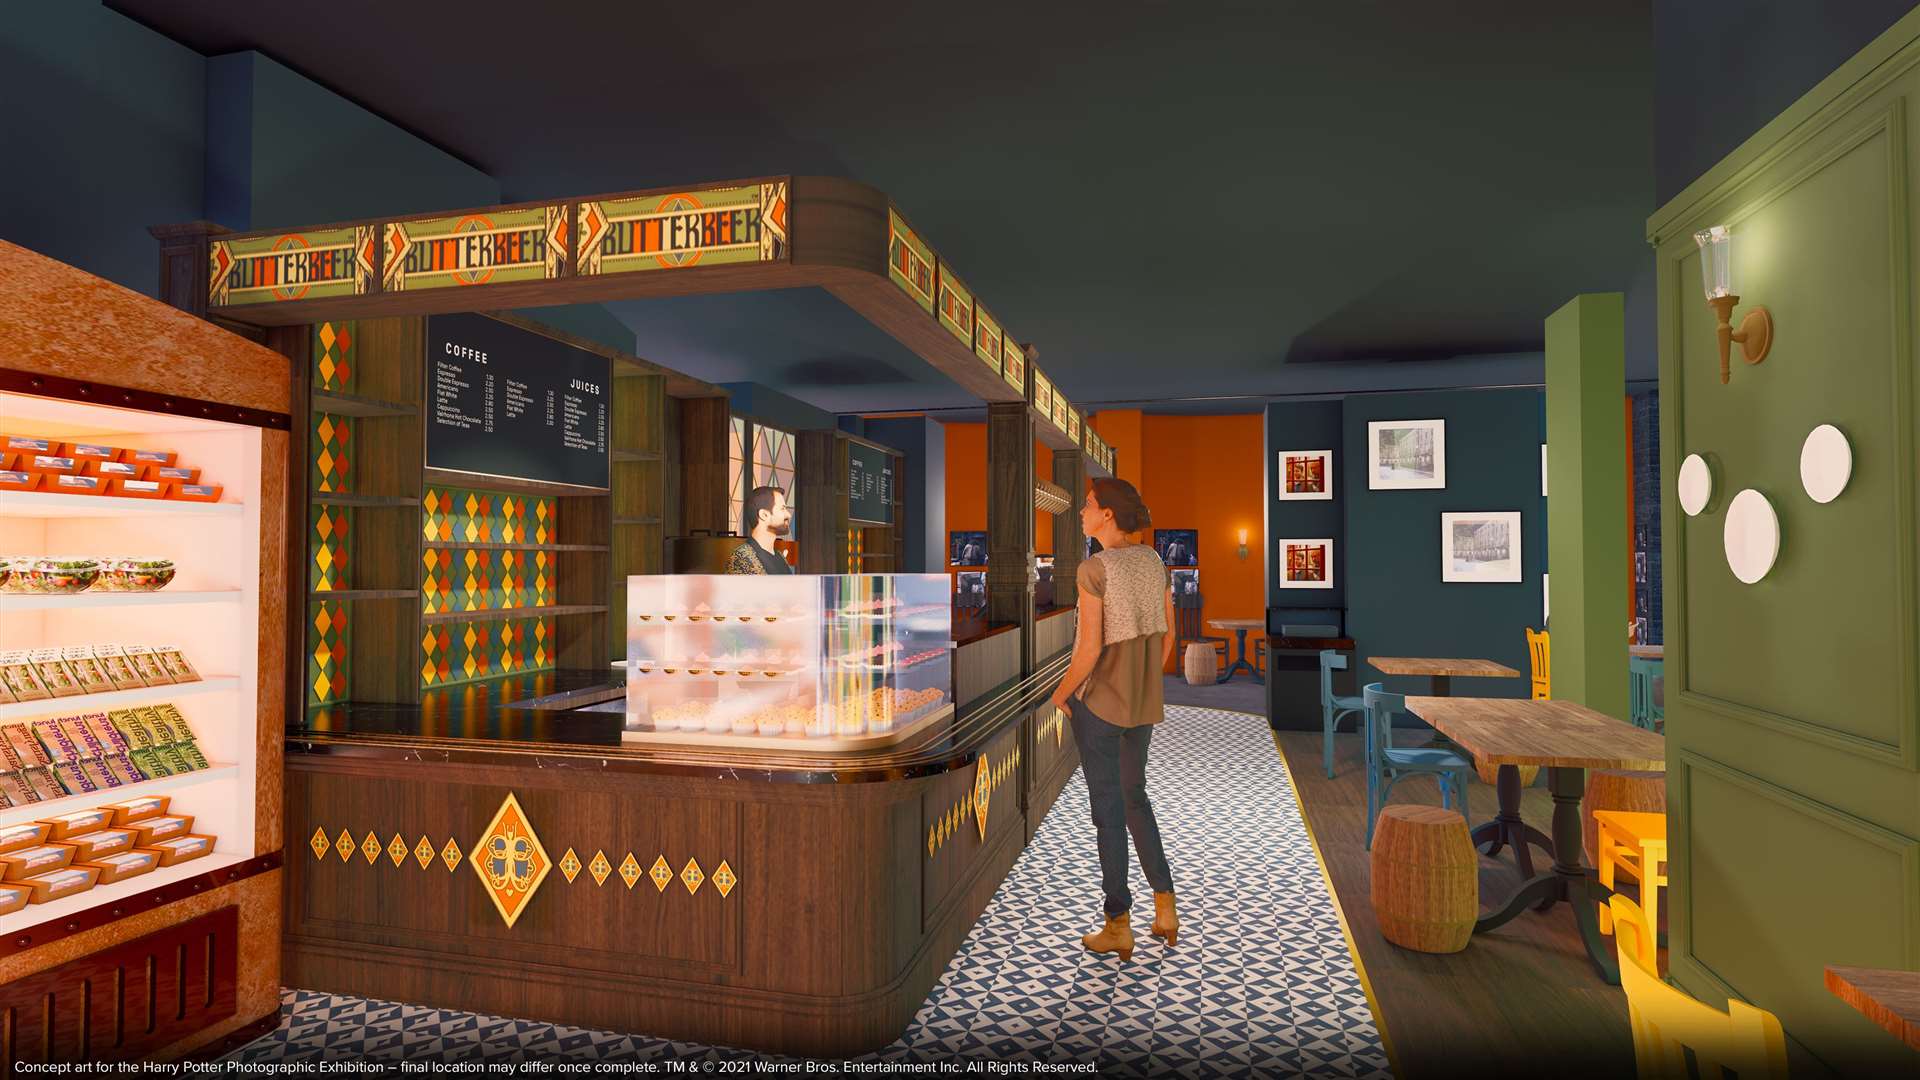 A Butterbeer bar is opening at the new attraction in Covent Garden. Credit: The Harry Potter Photographic Exhibition